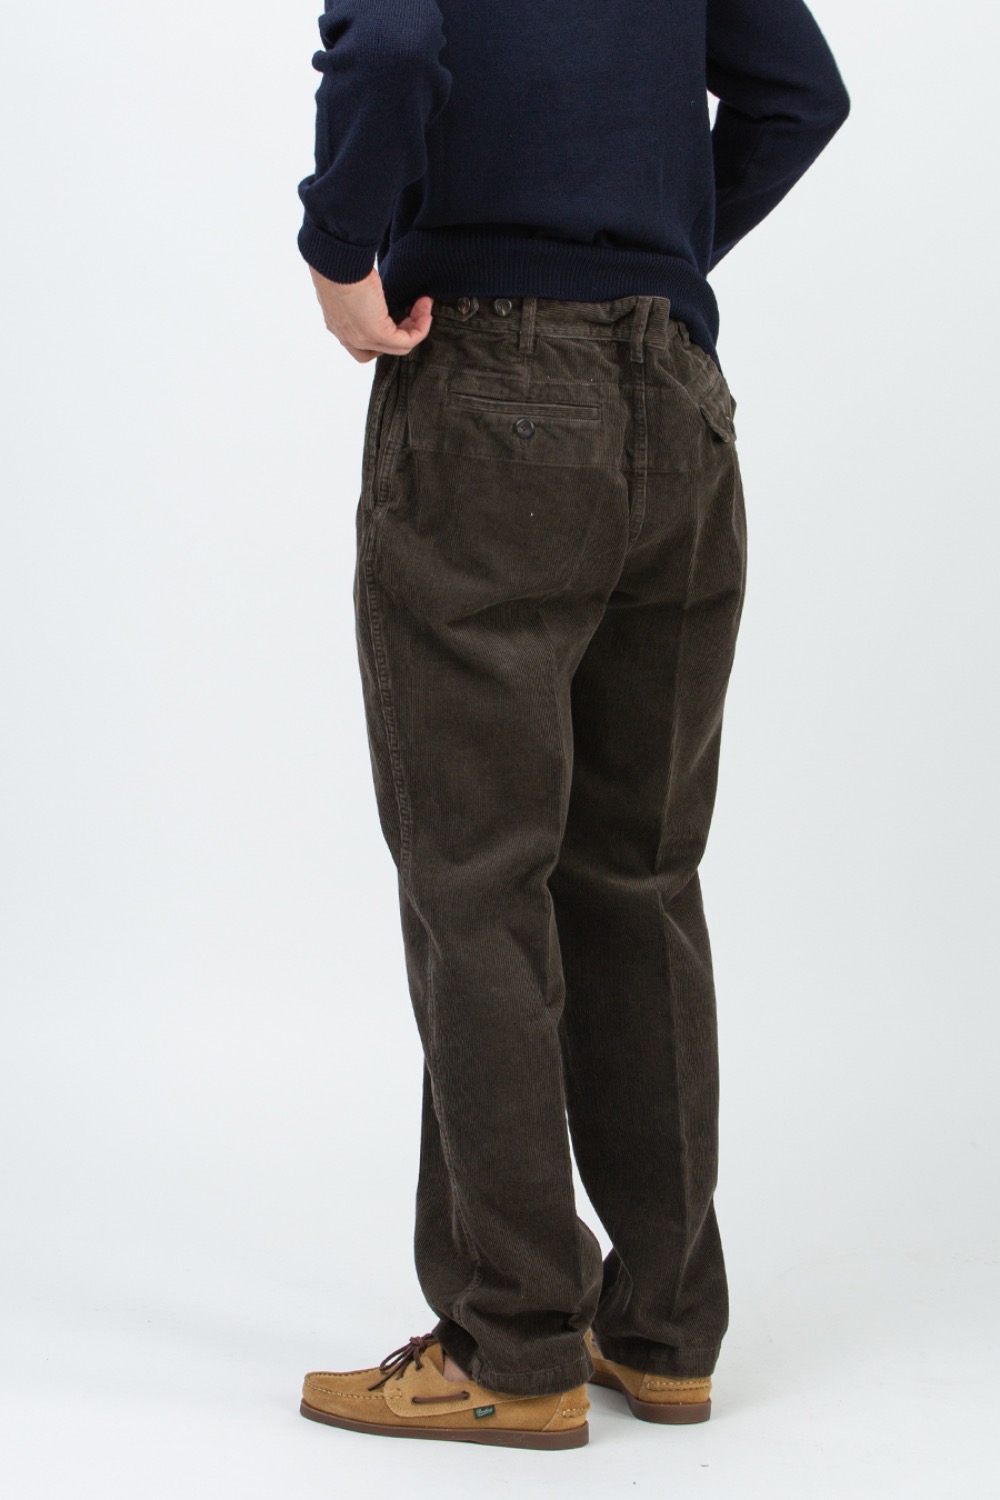 (CARRY OVER) BROWN CORDUROY SINGLE-PLEAT GAMES CHINOS